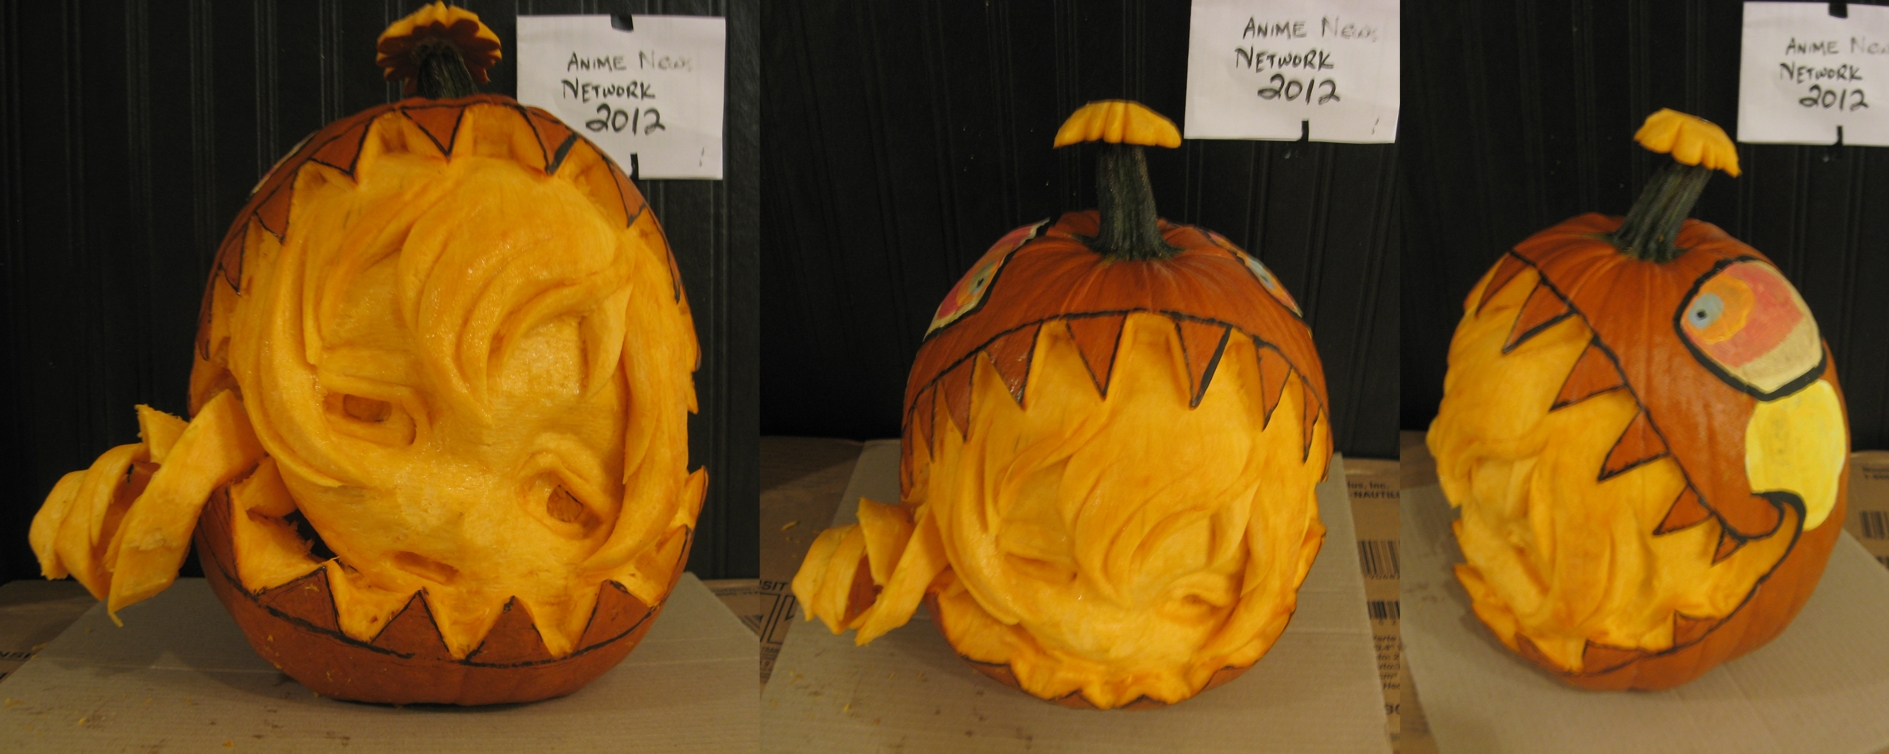 15 Pumpkin Carving Ideas That You'll Want To Try - Just Short of Crazy